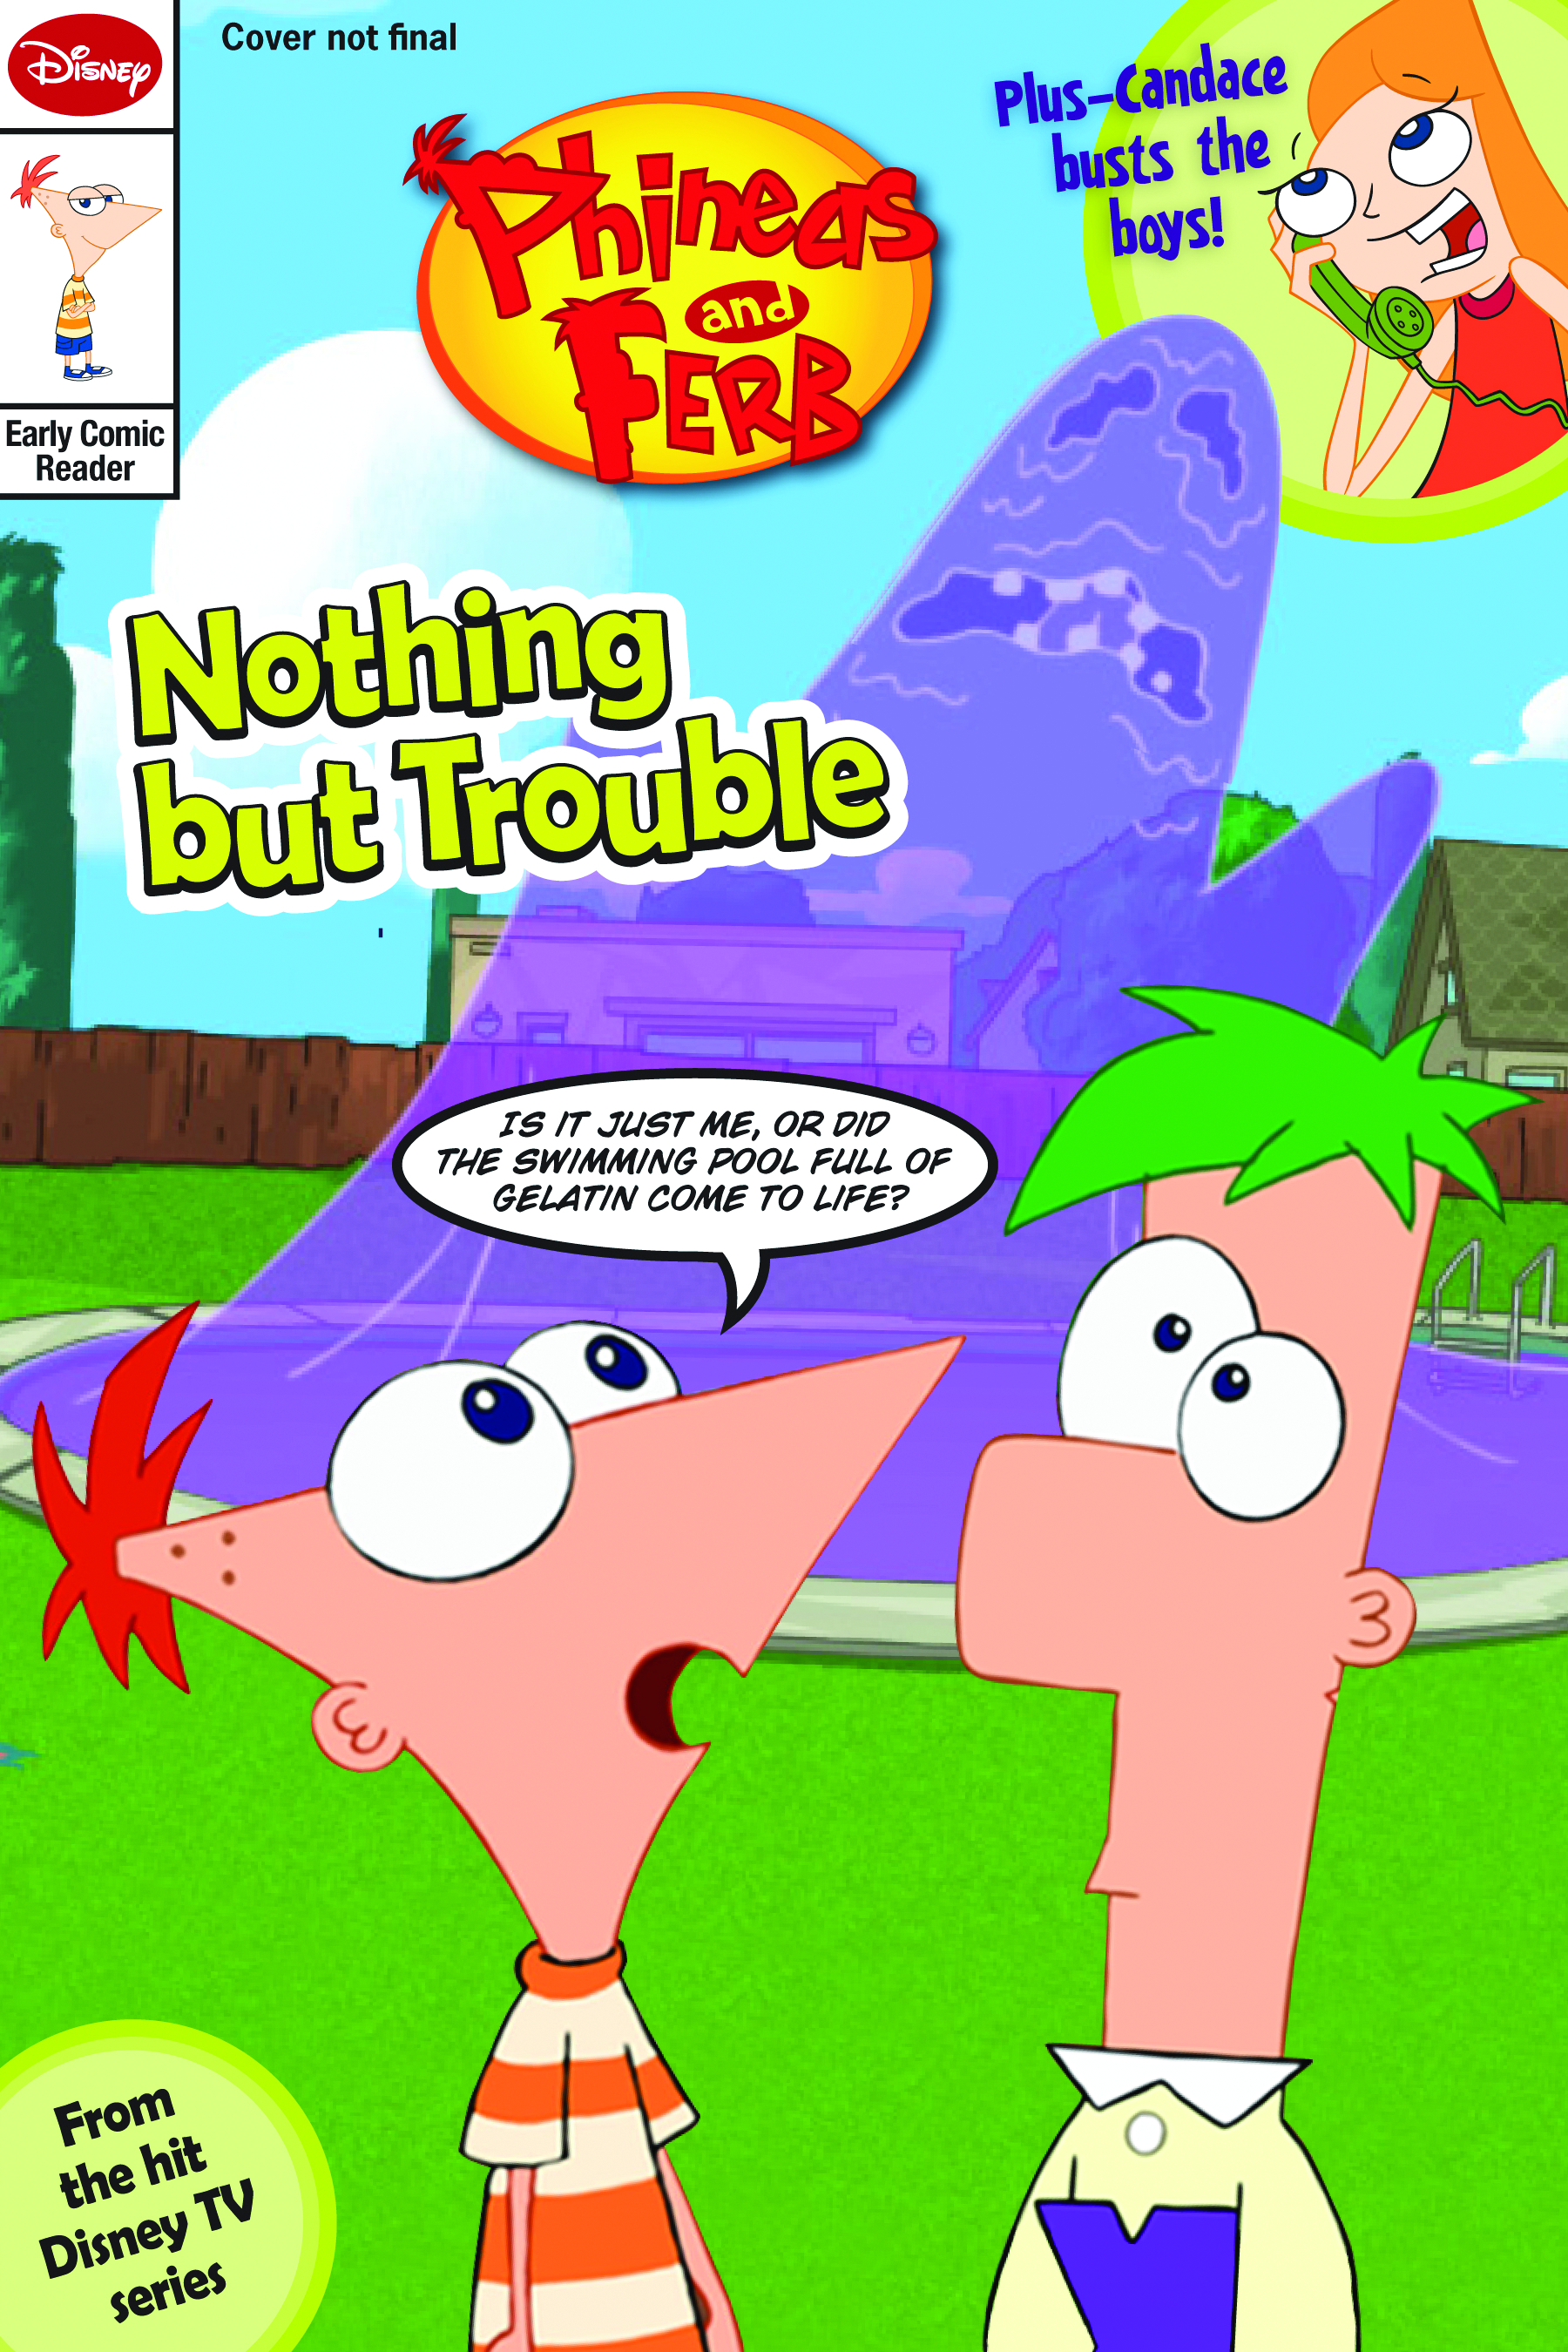 Phineas and ferb comic